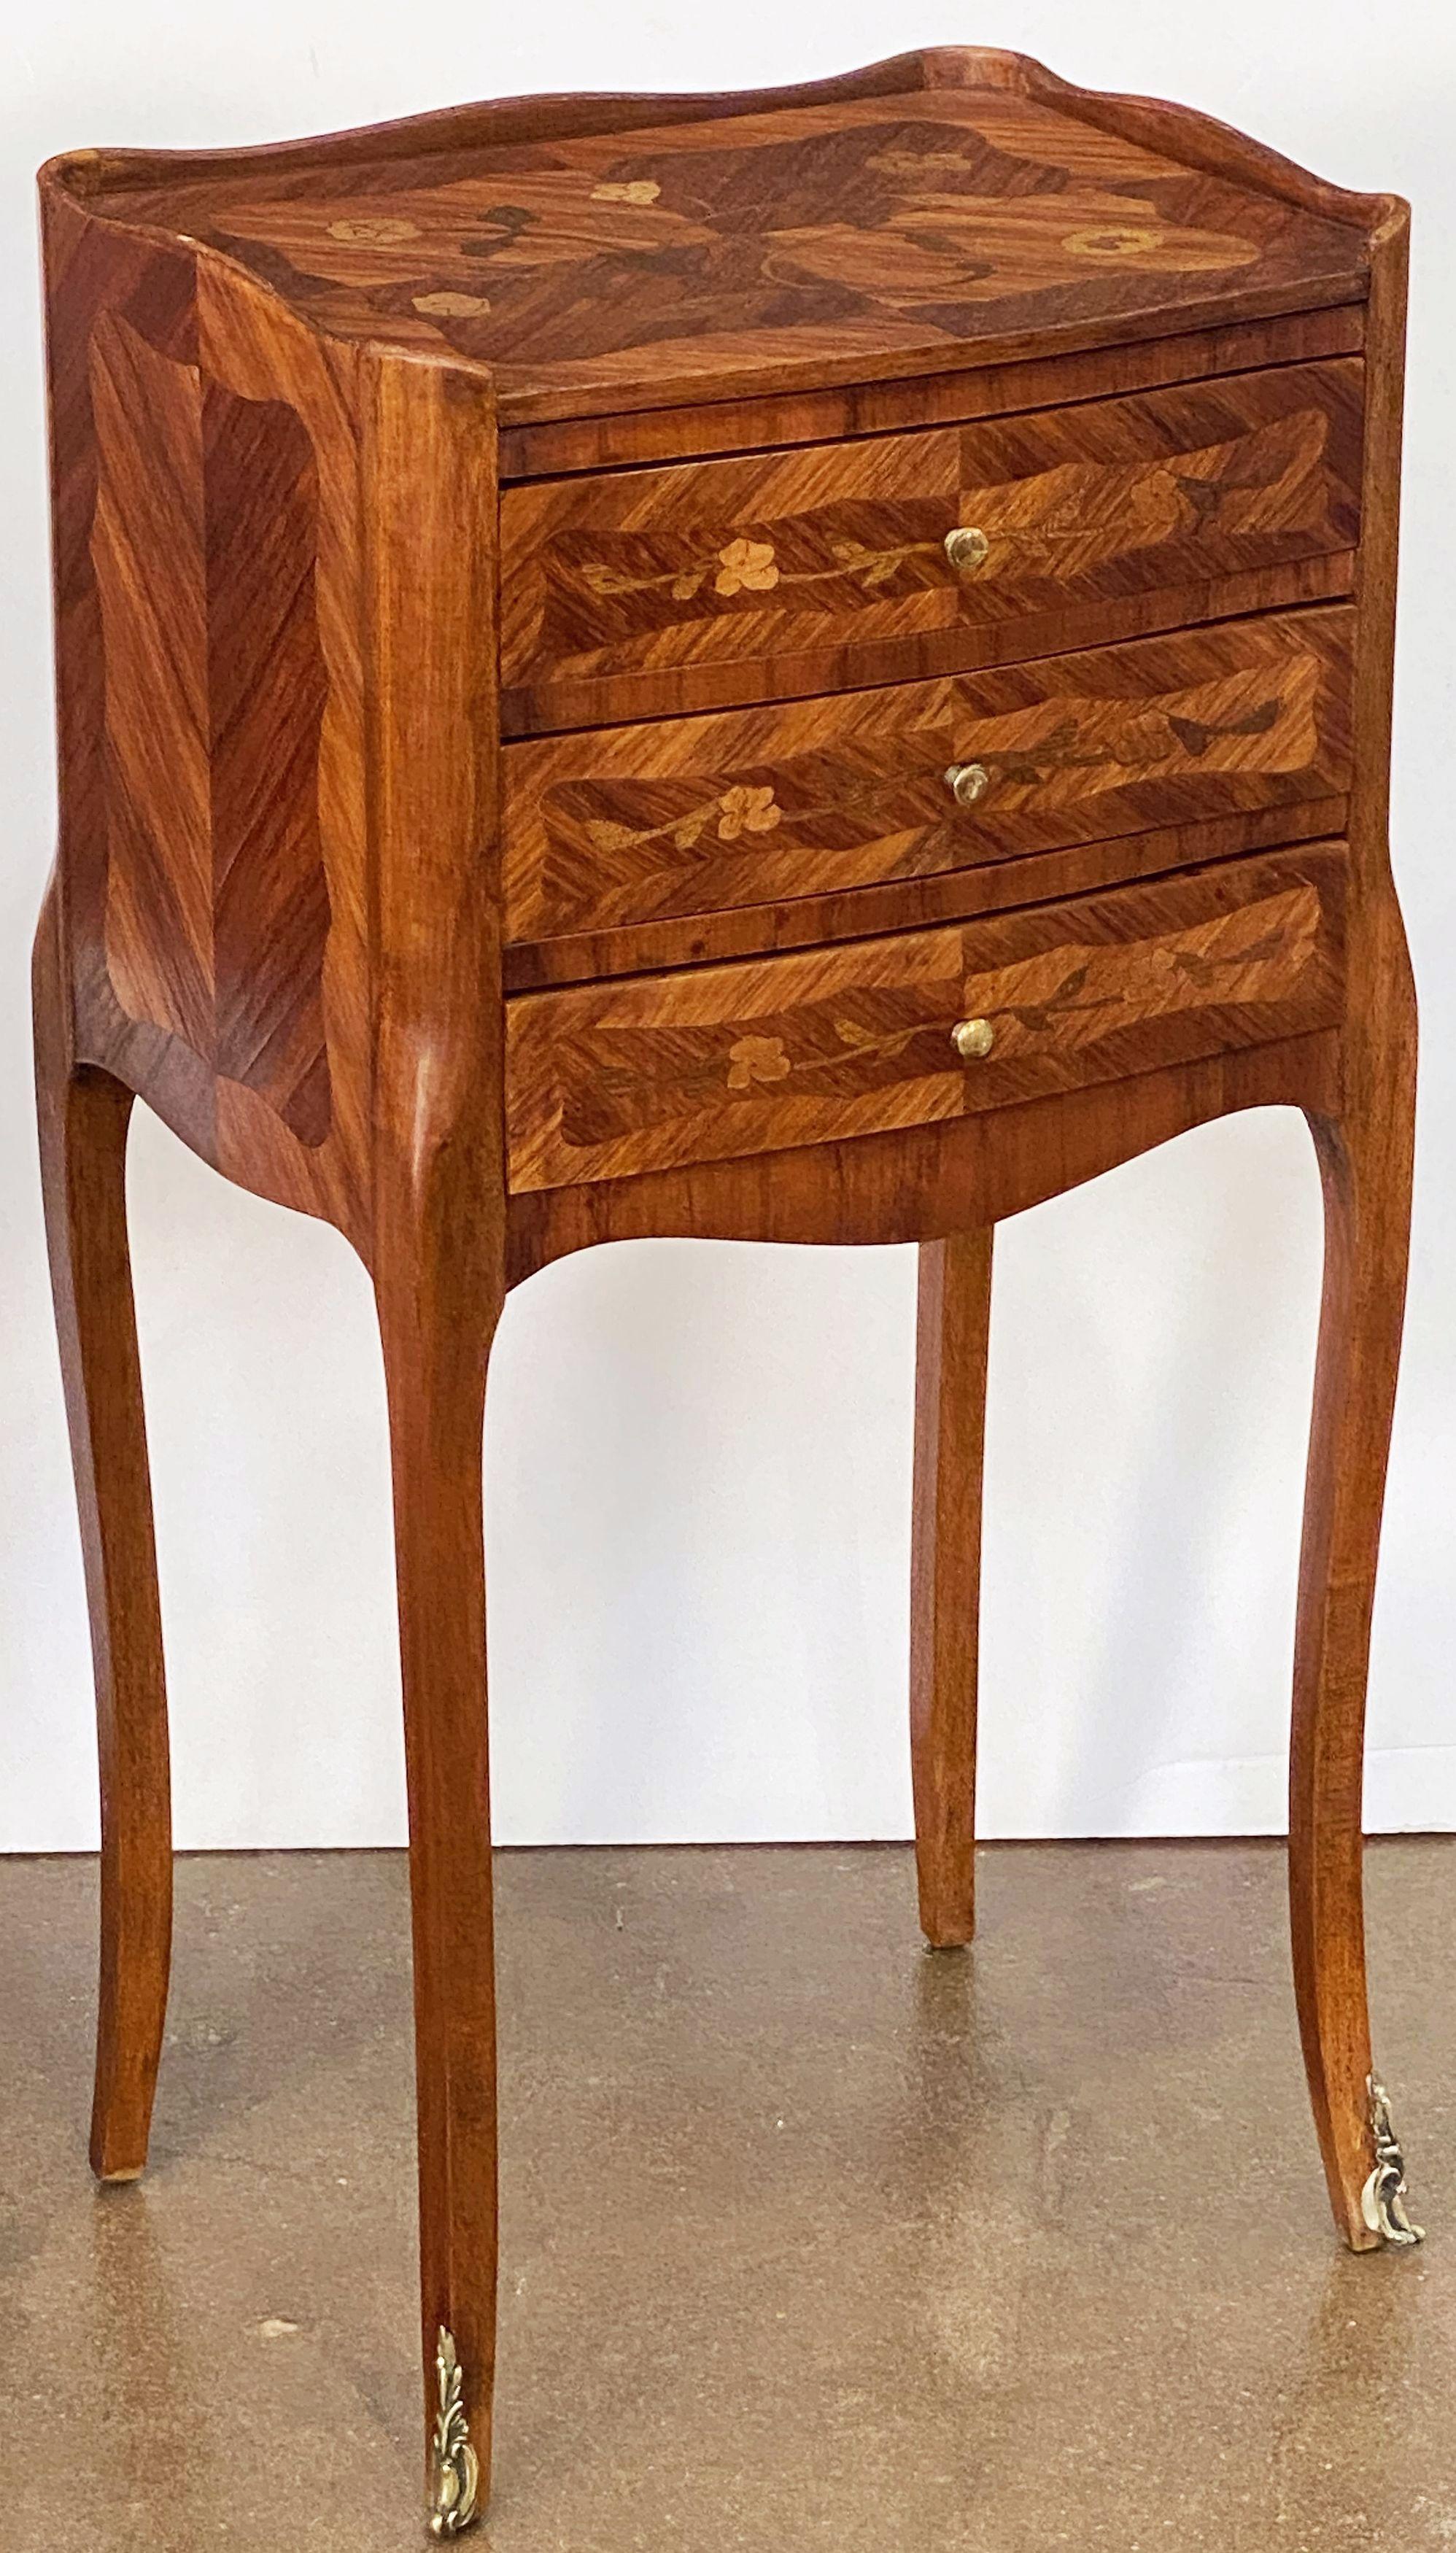 Metal Pair of French Inlaid Bedside Tables or Nightstands on Cabriole Legs